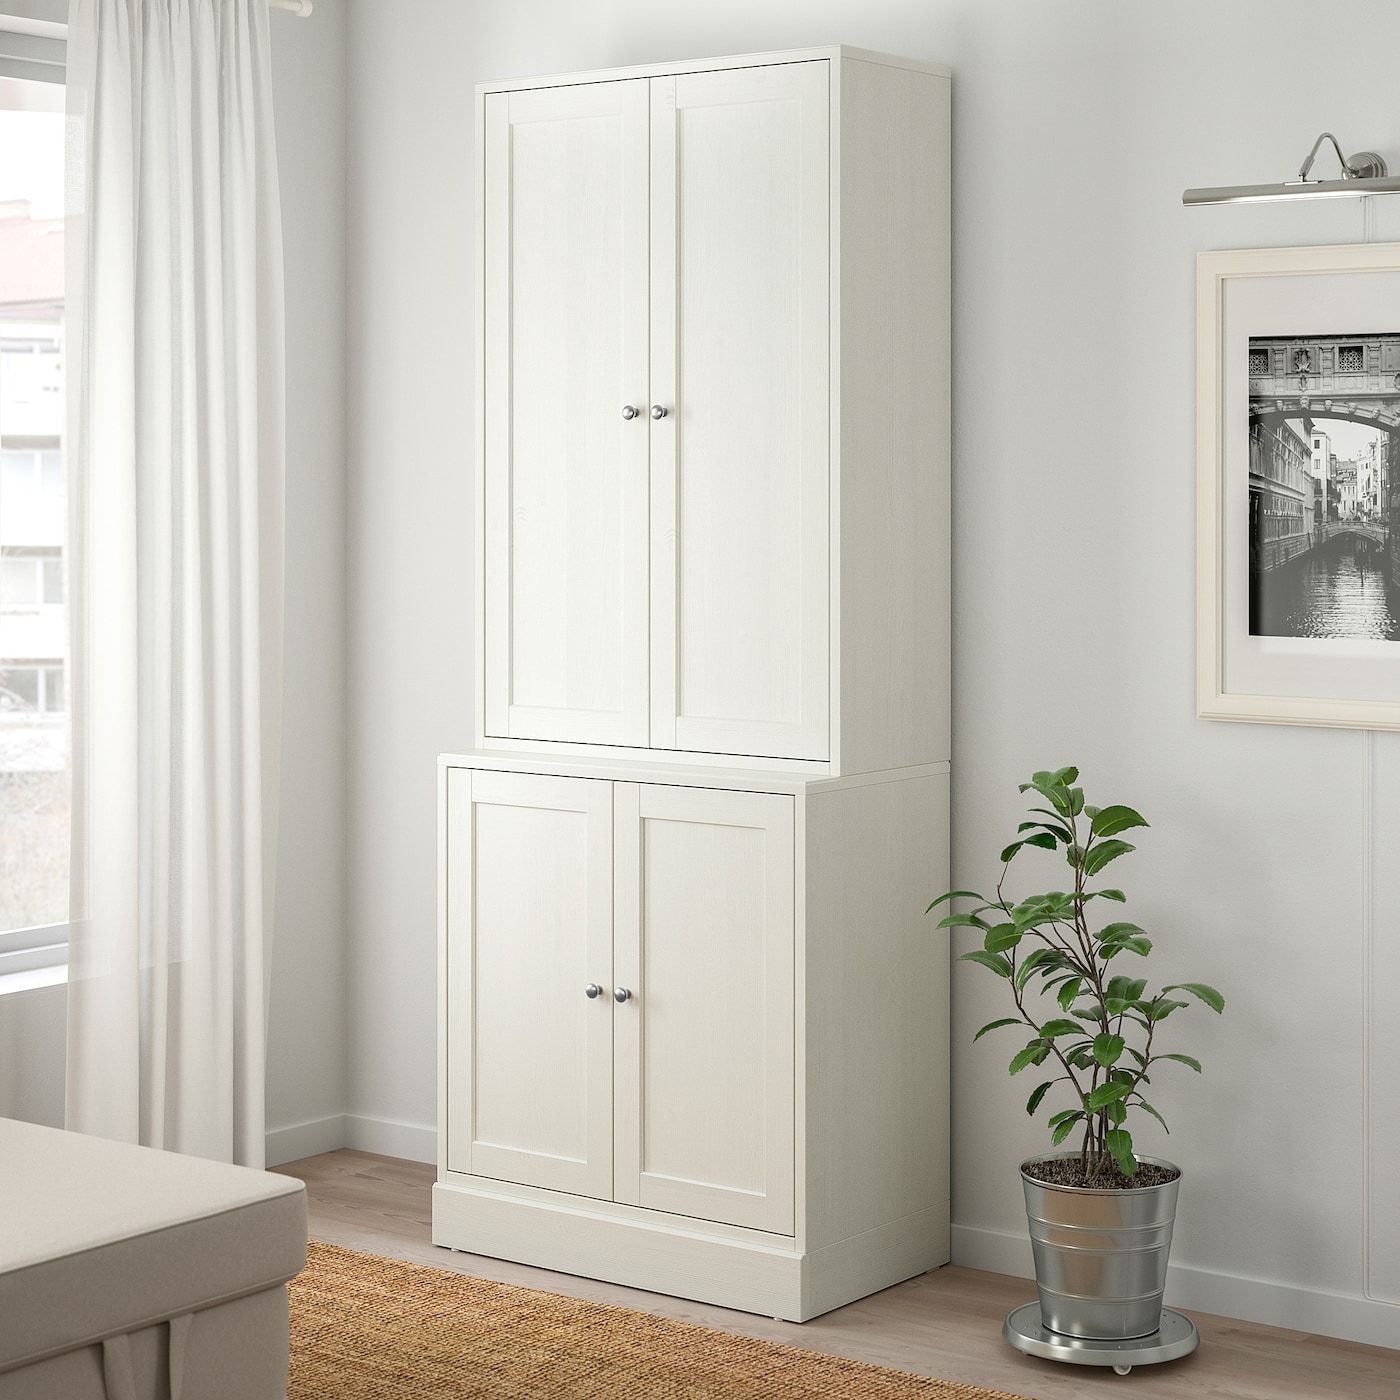 Havsta Storage Combination With Doors, White, 317/8x181/2x831/2" – Ikea Intended For 2 Separable Wardrobes (View 15 of 15)